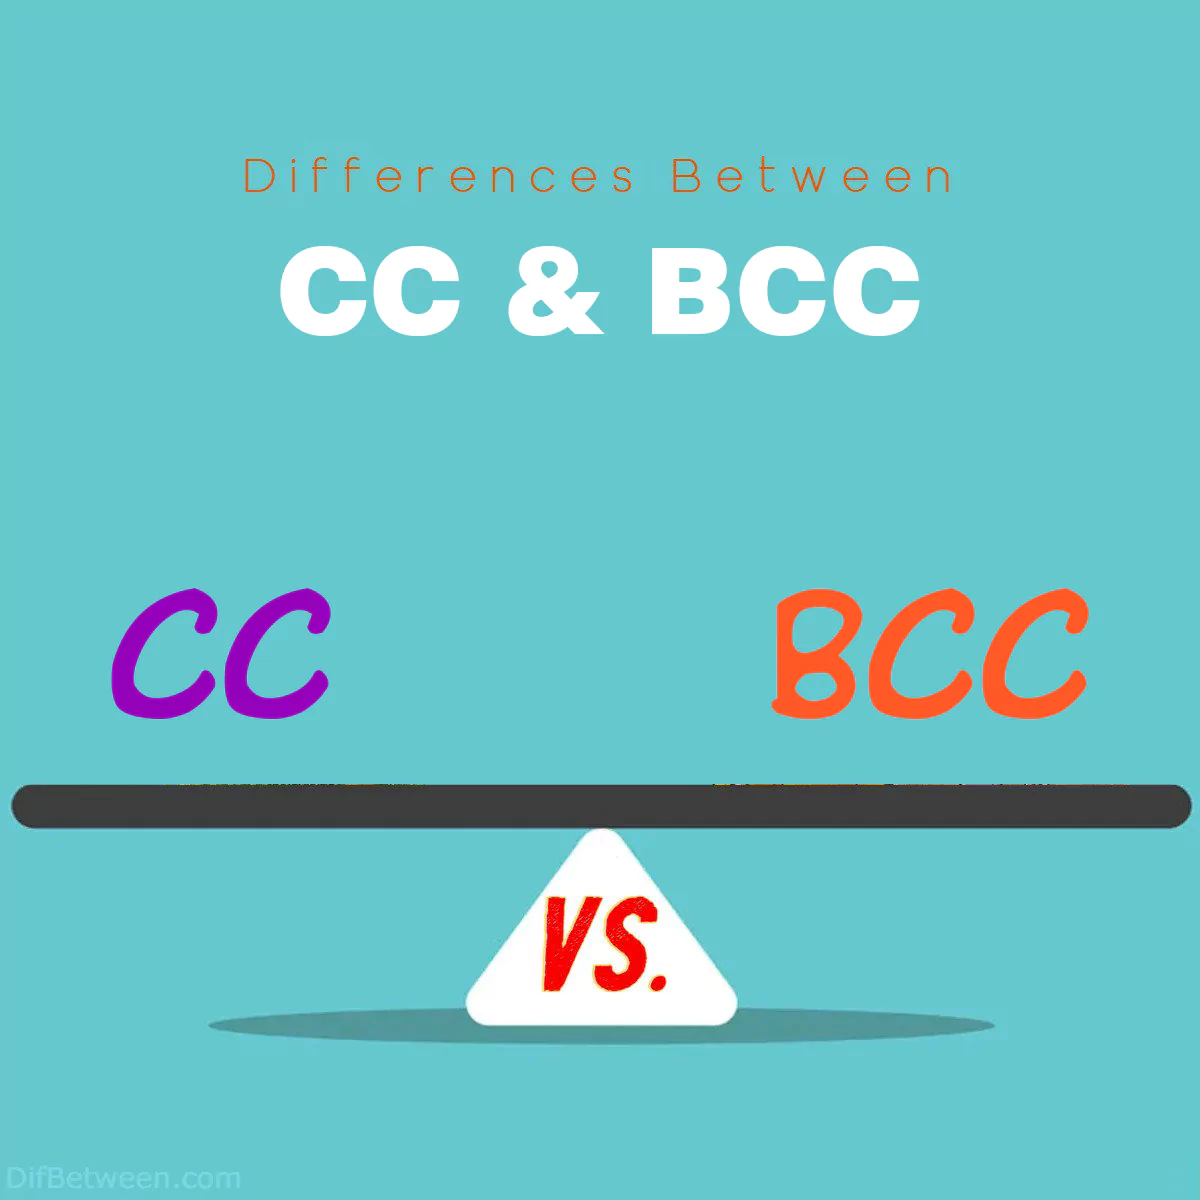 Differences Between CC and BCC